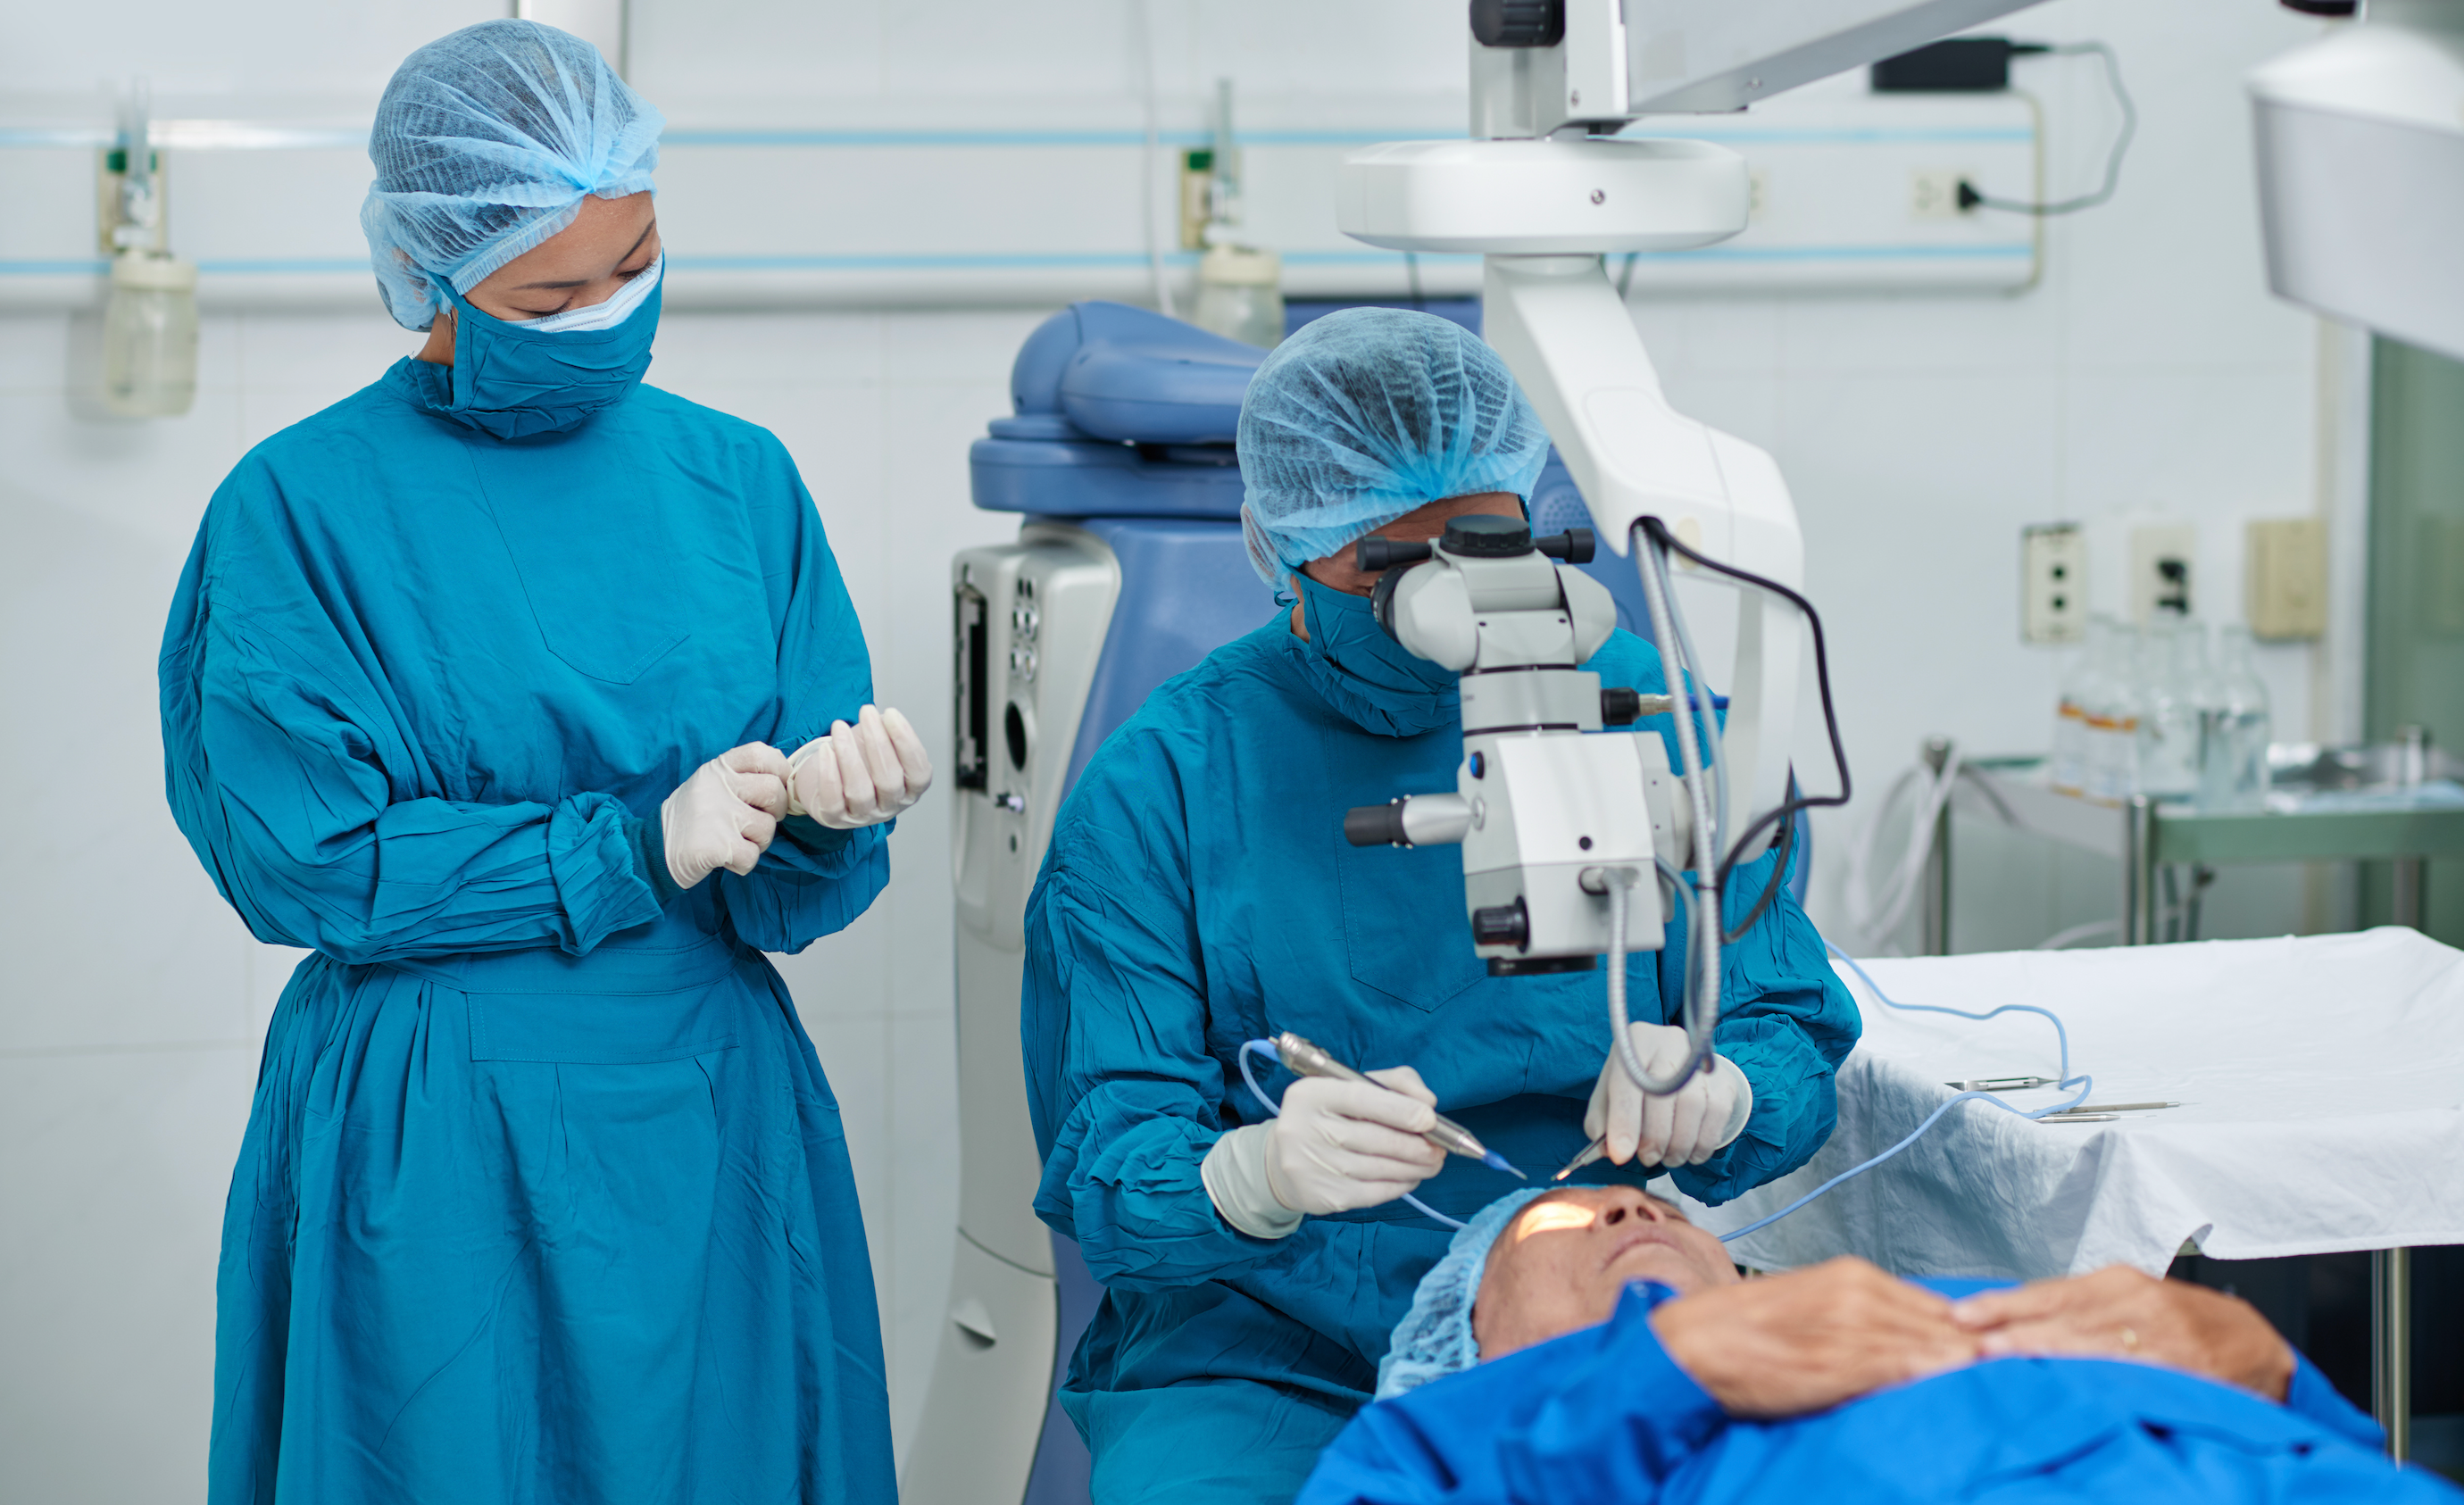 Cataract surgery reimbursements may not be enough for some patients